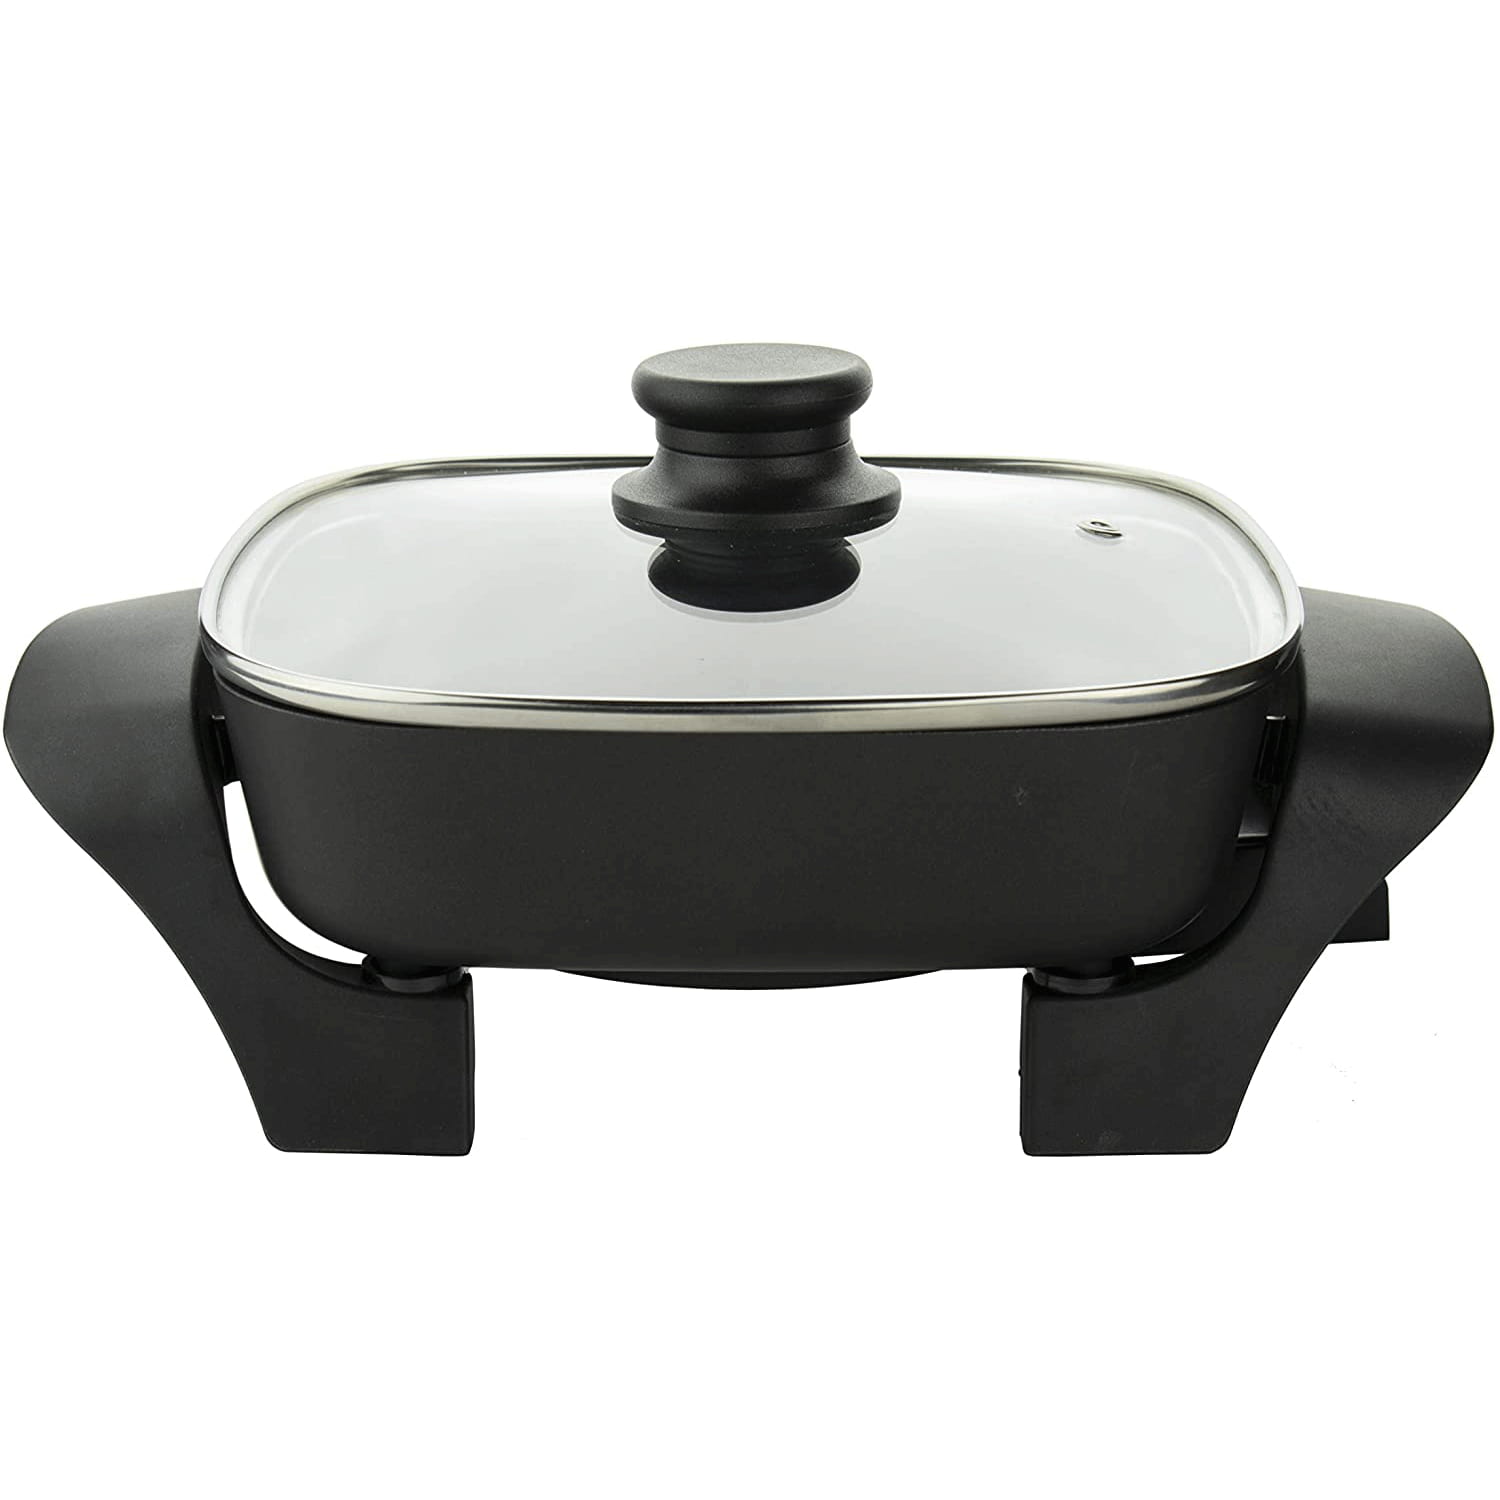 Personal Stir Fry Griddle Pan Rapid Heat Up 600 Watts Non stick Electric  Skillet